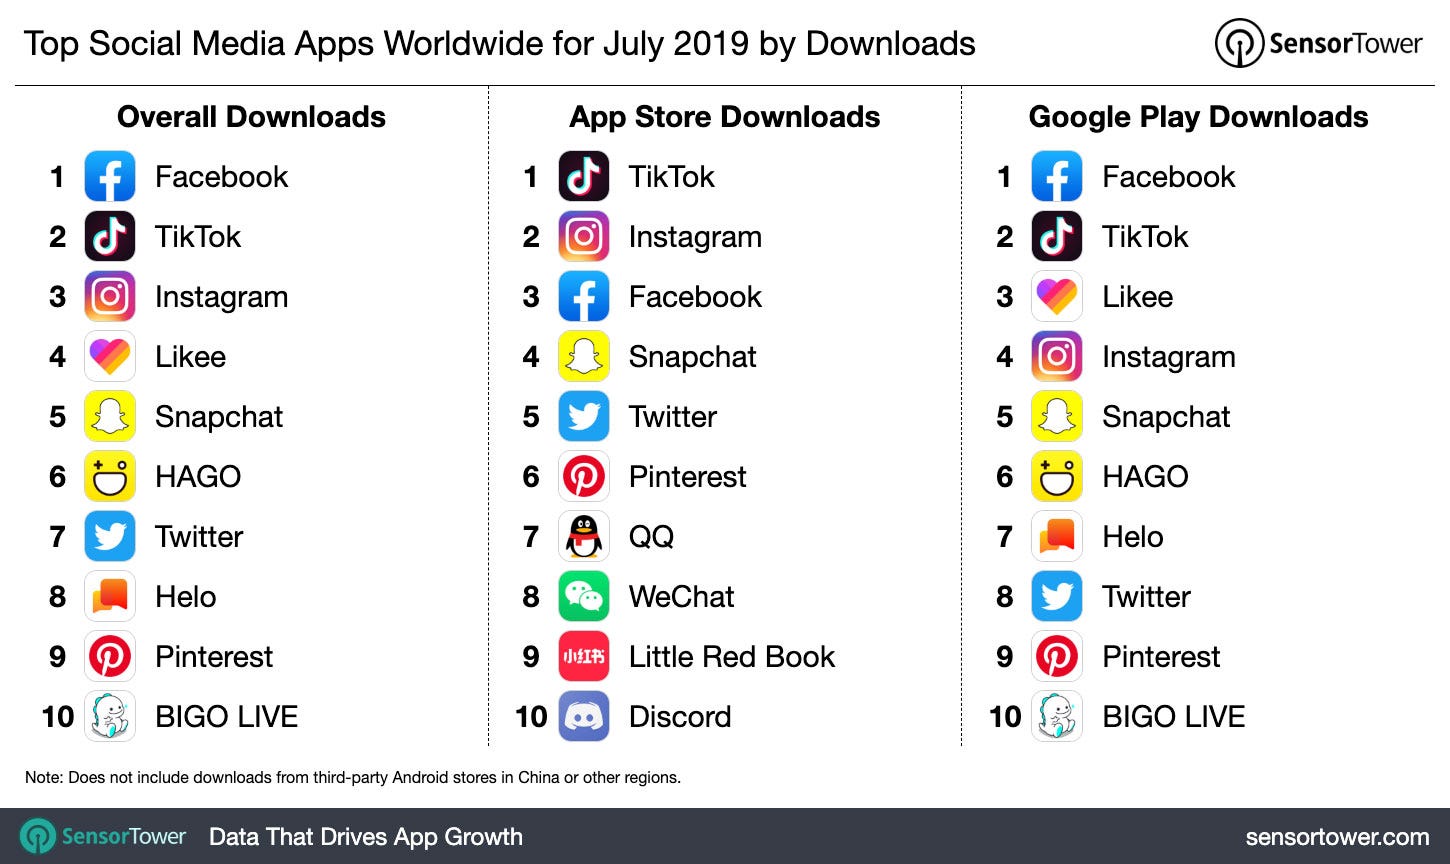 Top Social Media Apps Worldwide for July 2019 by Downloads